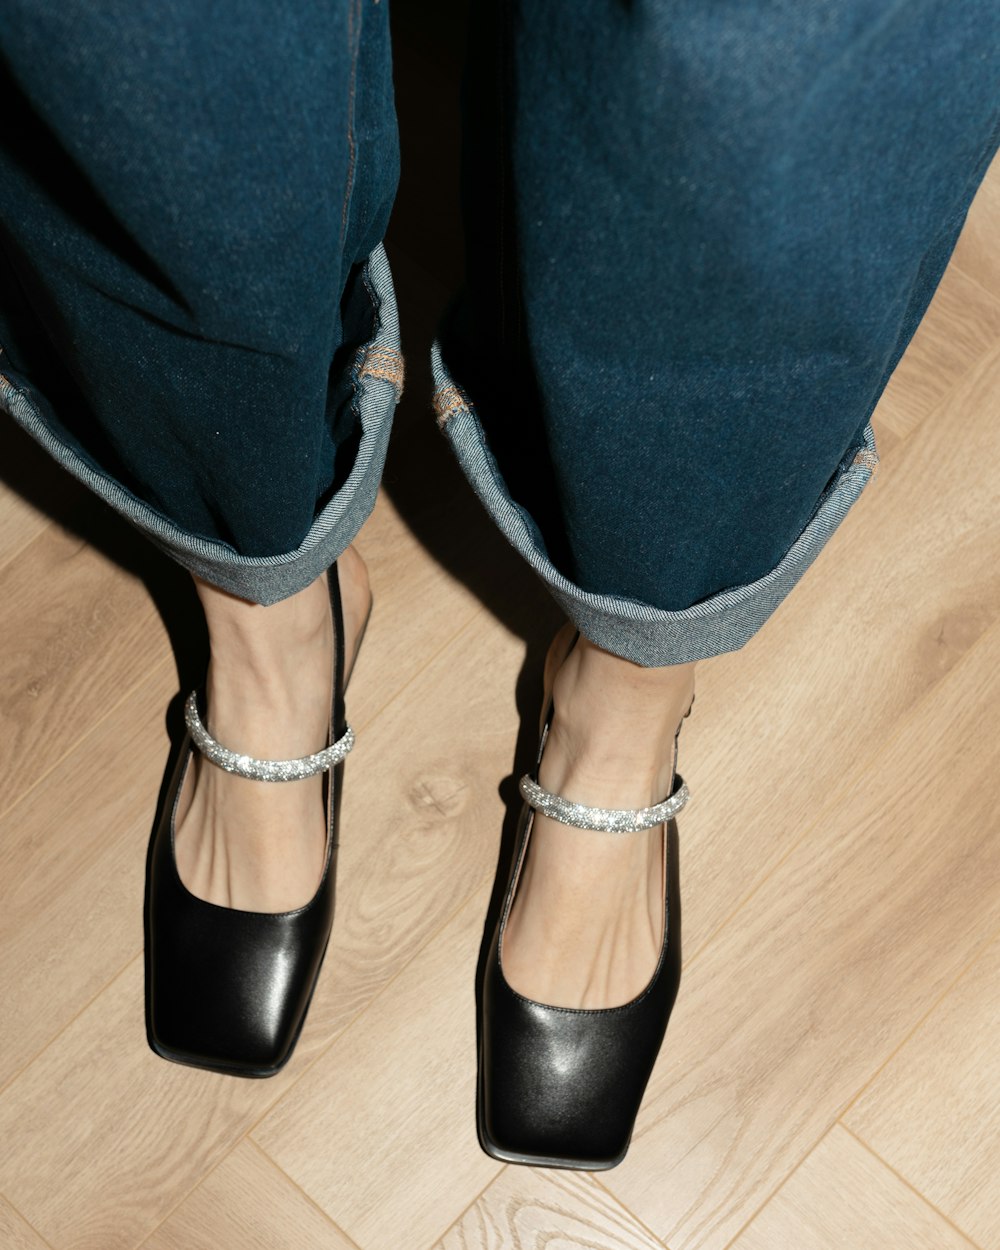 a person standing on a wooden floor wearing black shoes